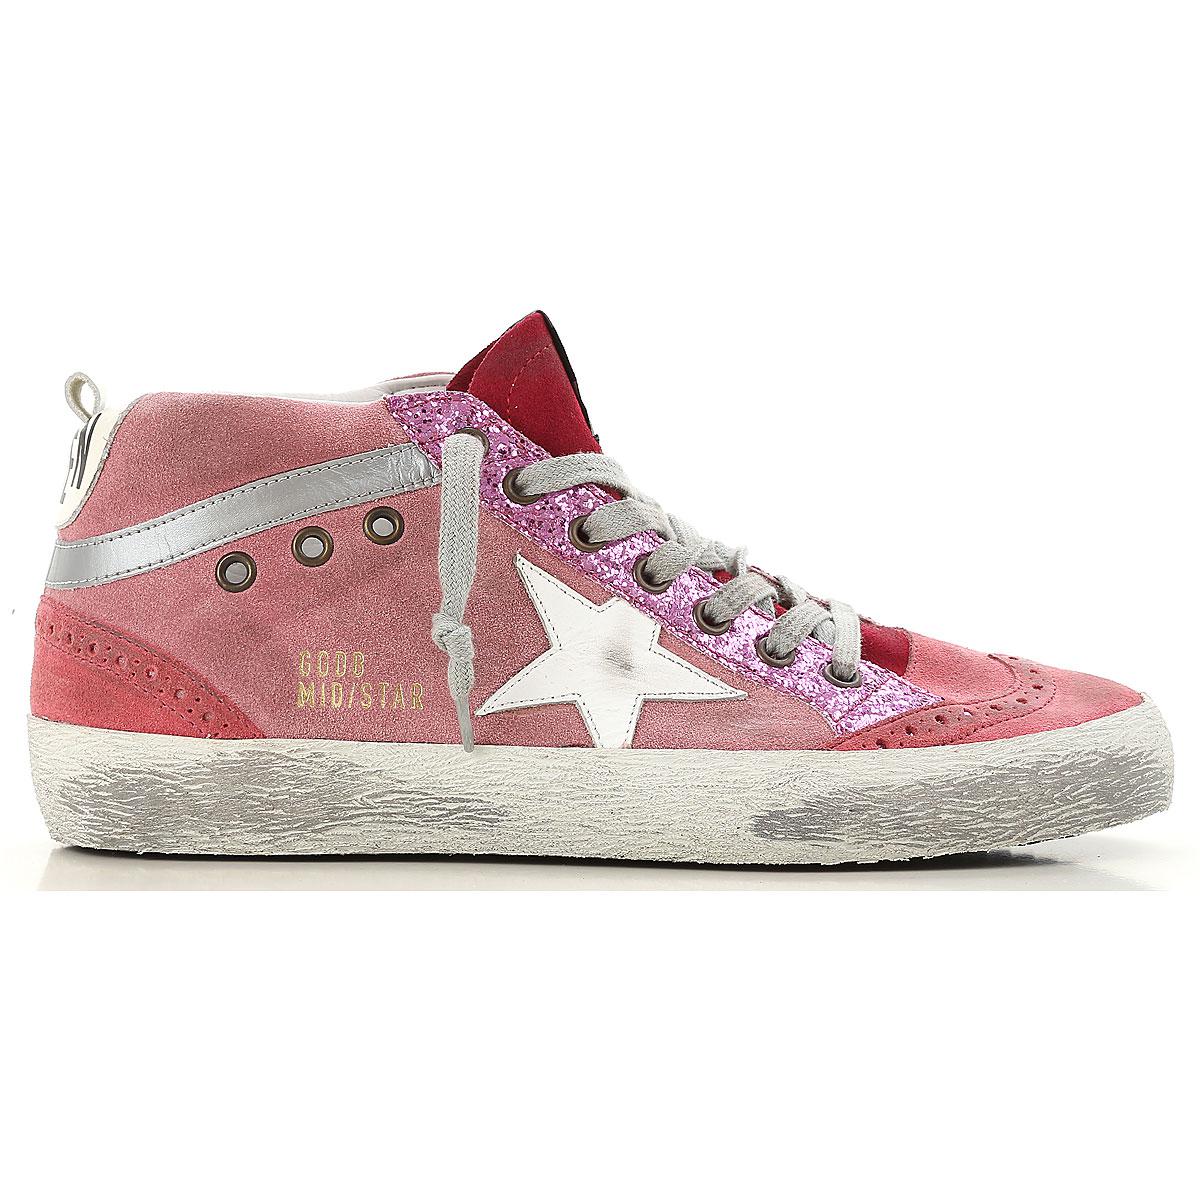 Golden Goose Deluxe Brand Leather Mid Star Sneakers in Pink/White (Pink ...